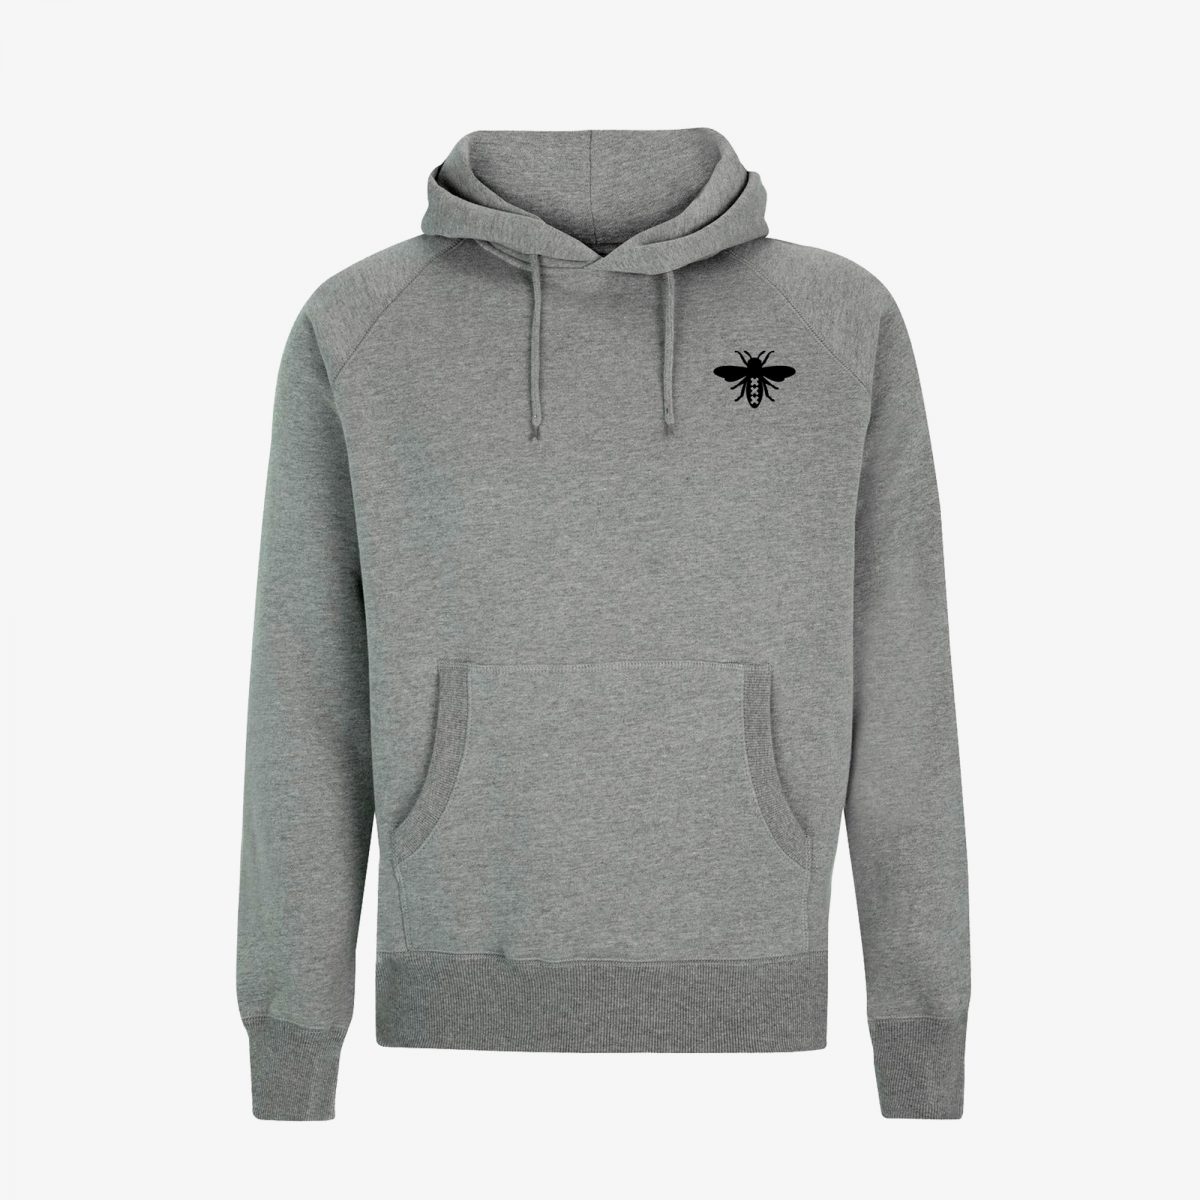 Classic-Grey-Hoodie-Front-Grey-Background